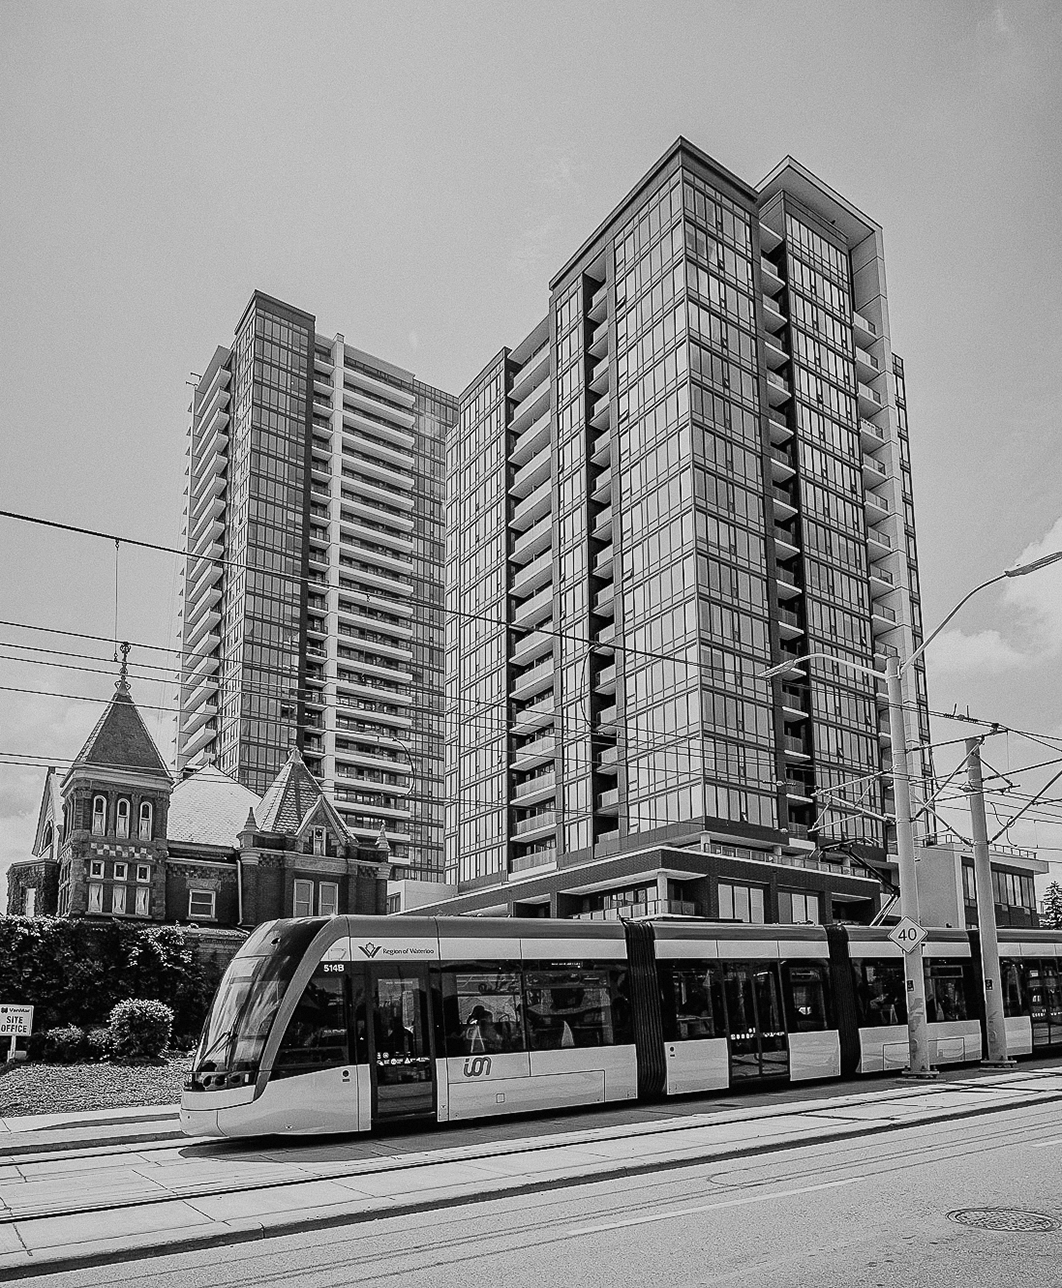 Station Park from street level with an LRT in the foreground